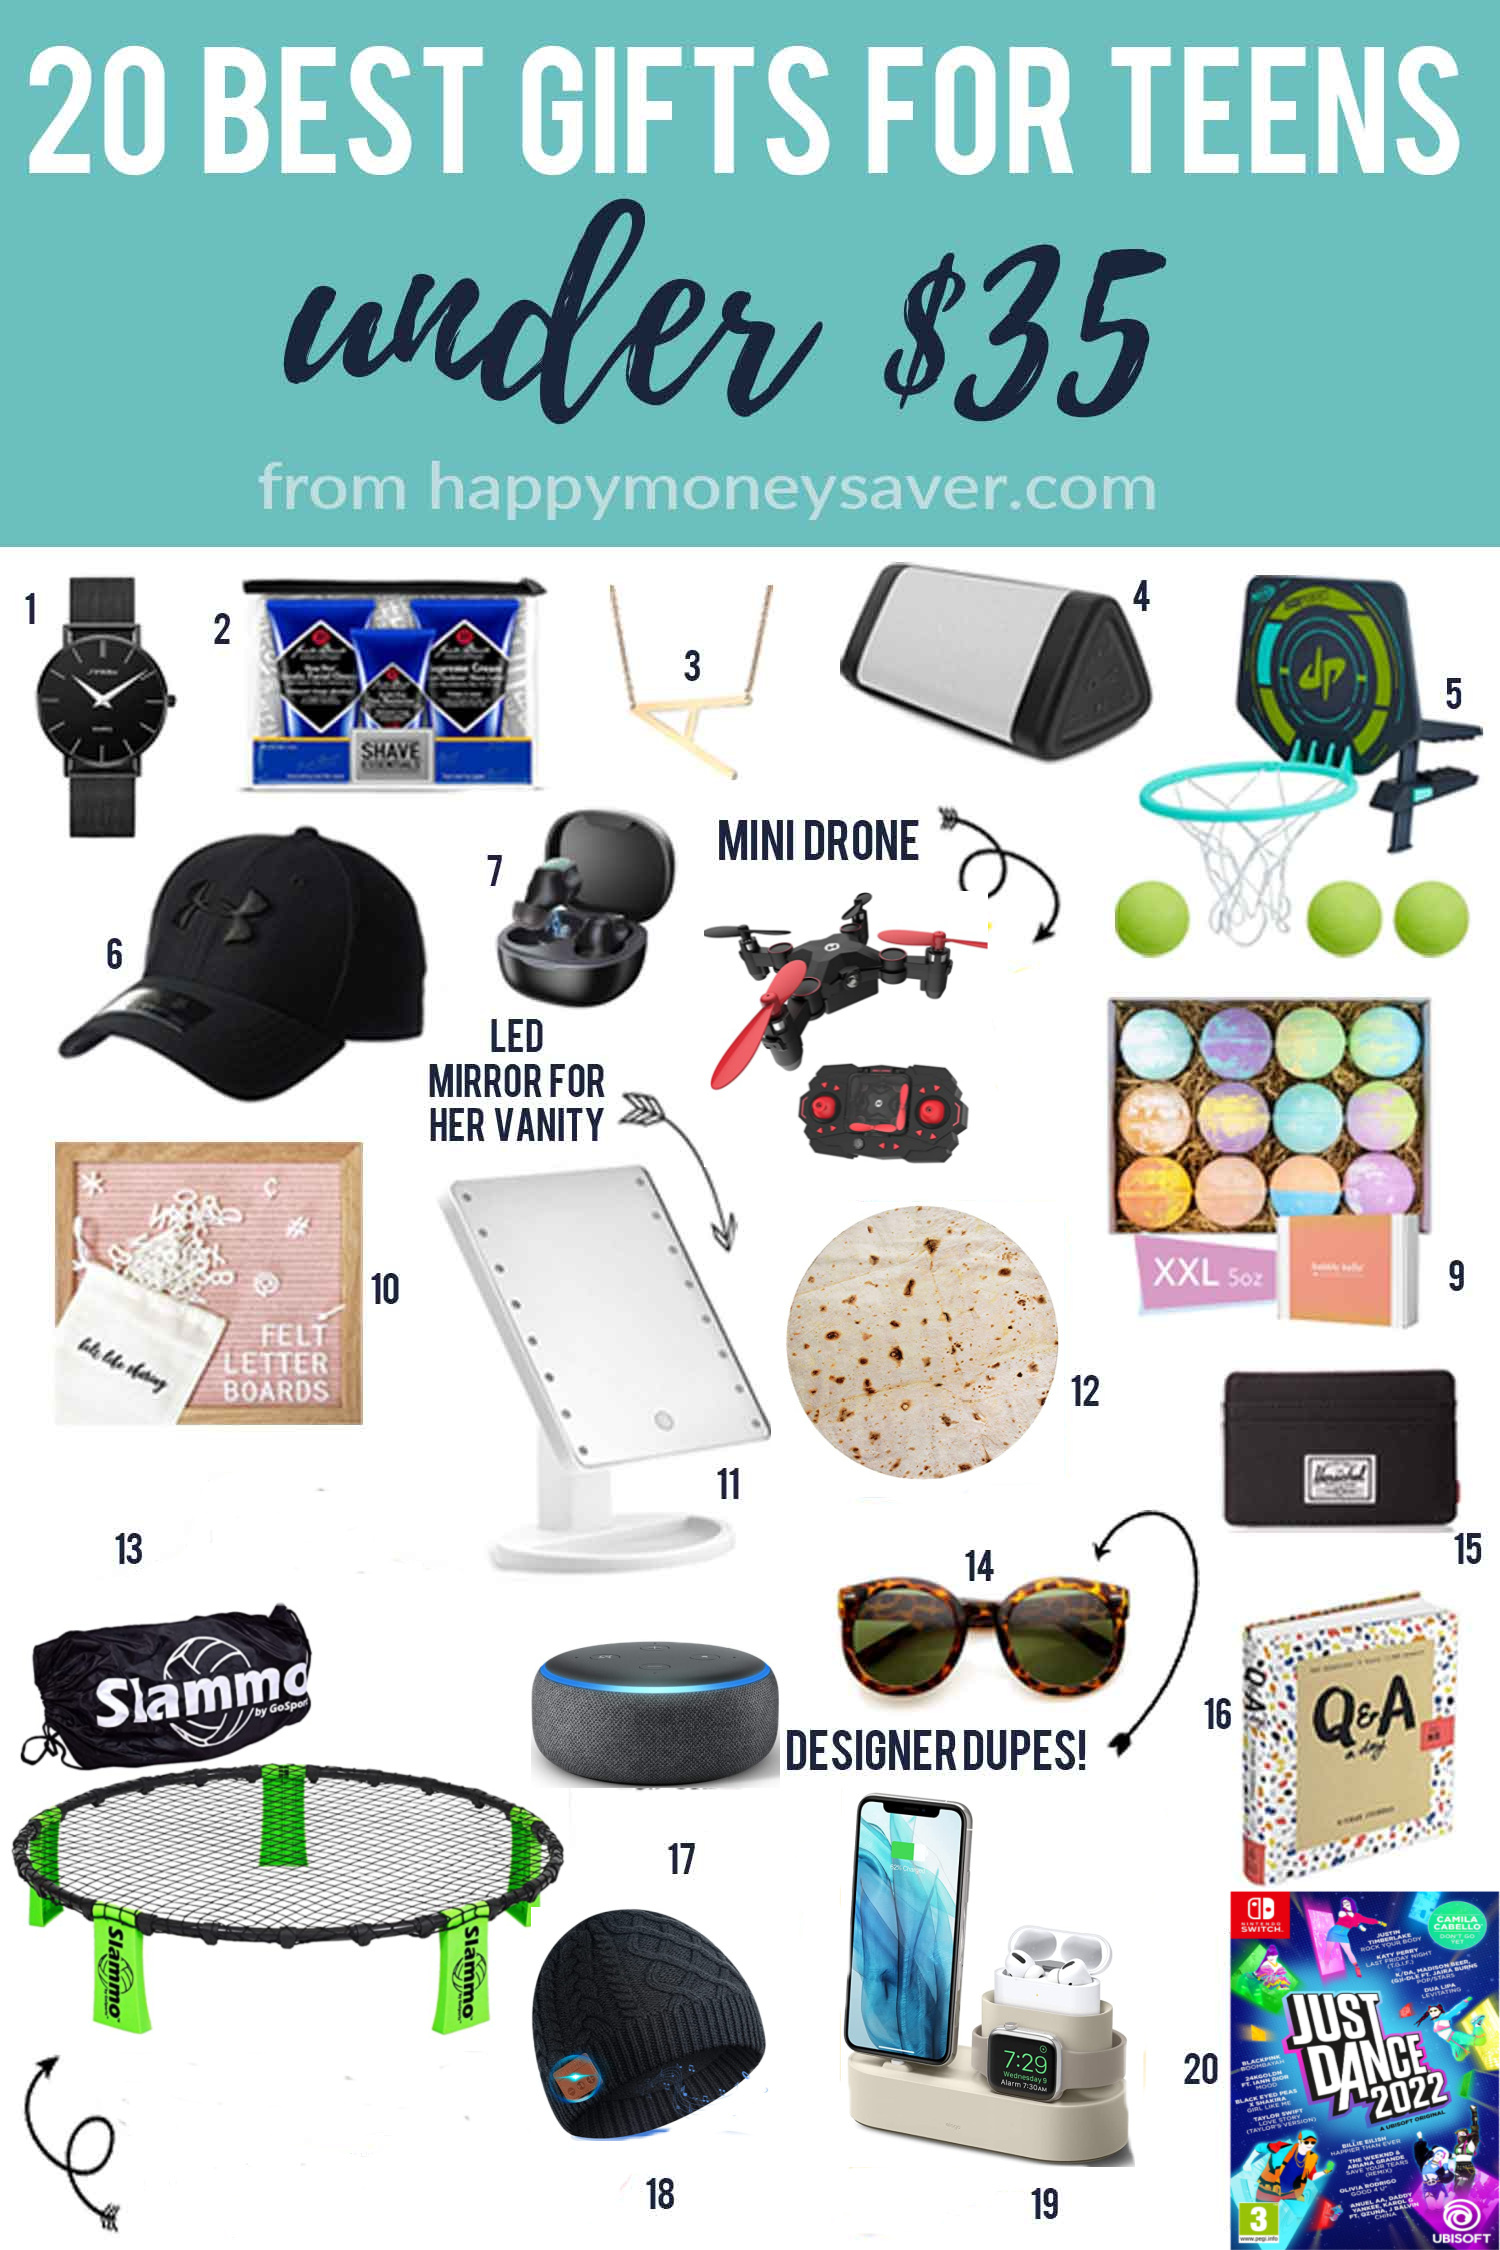 Image of 20 best gifts for teens under $35 from Happymoneysaver.com with numbered images of each item.